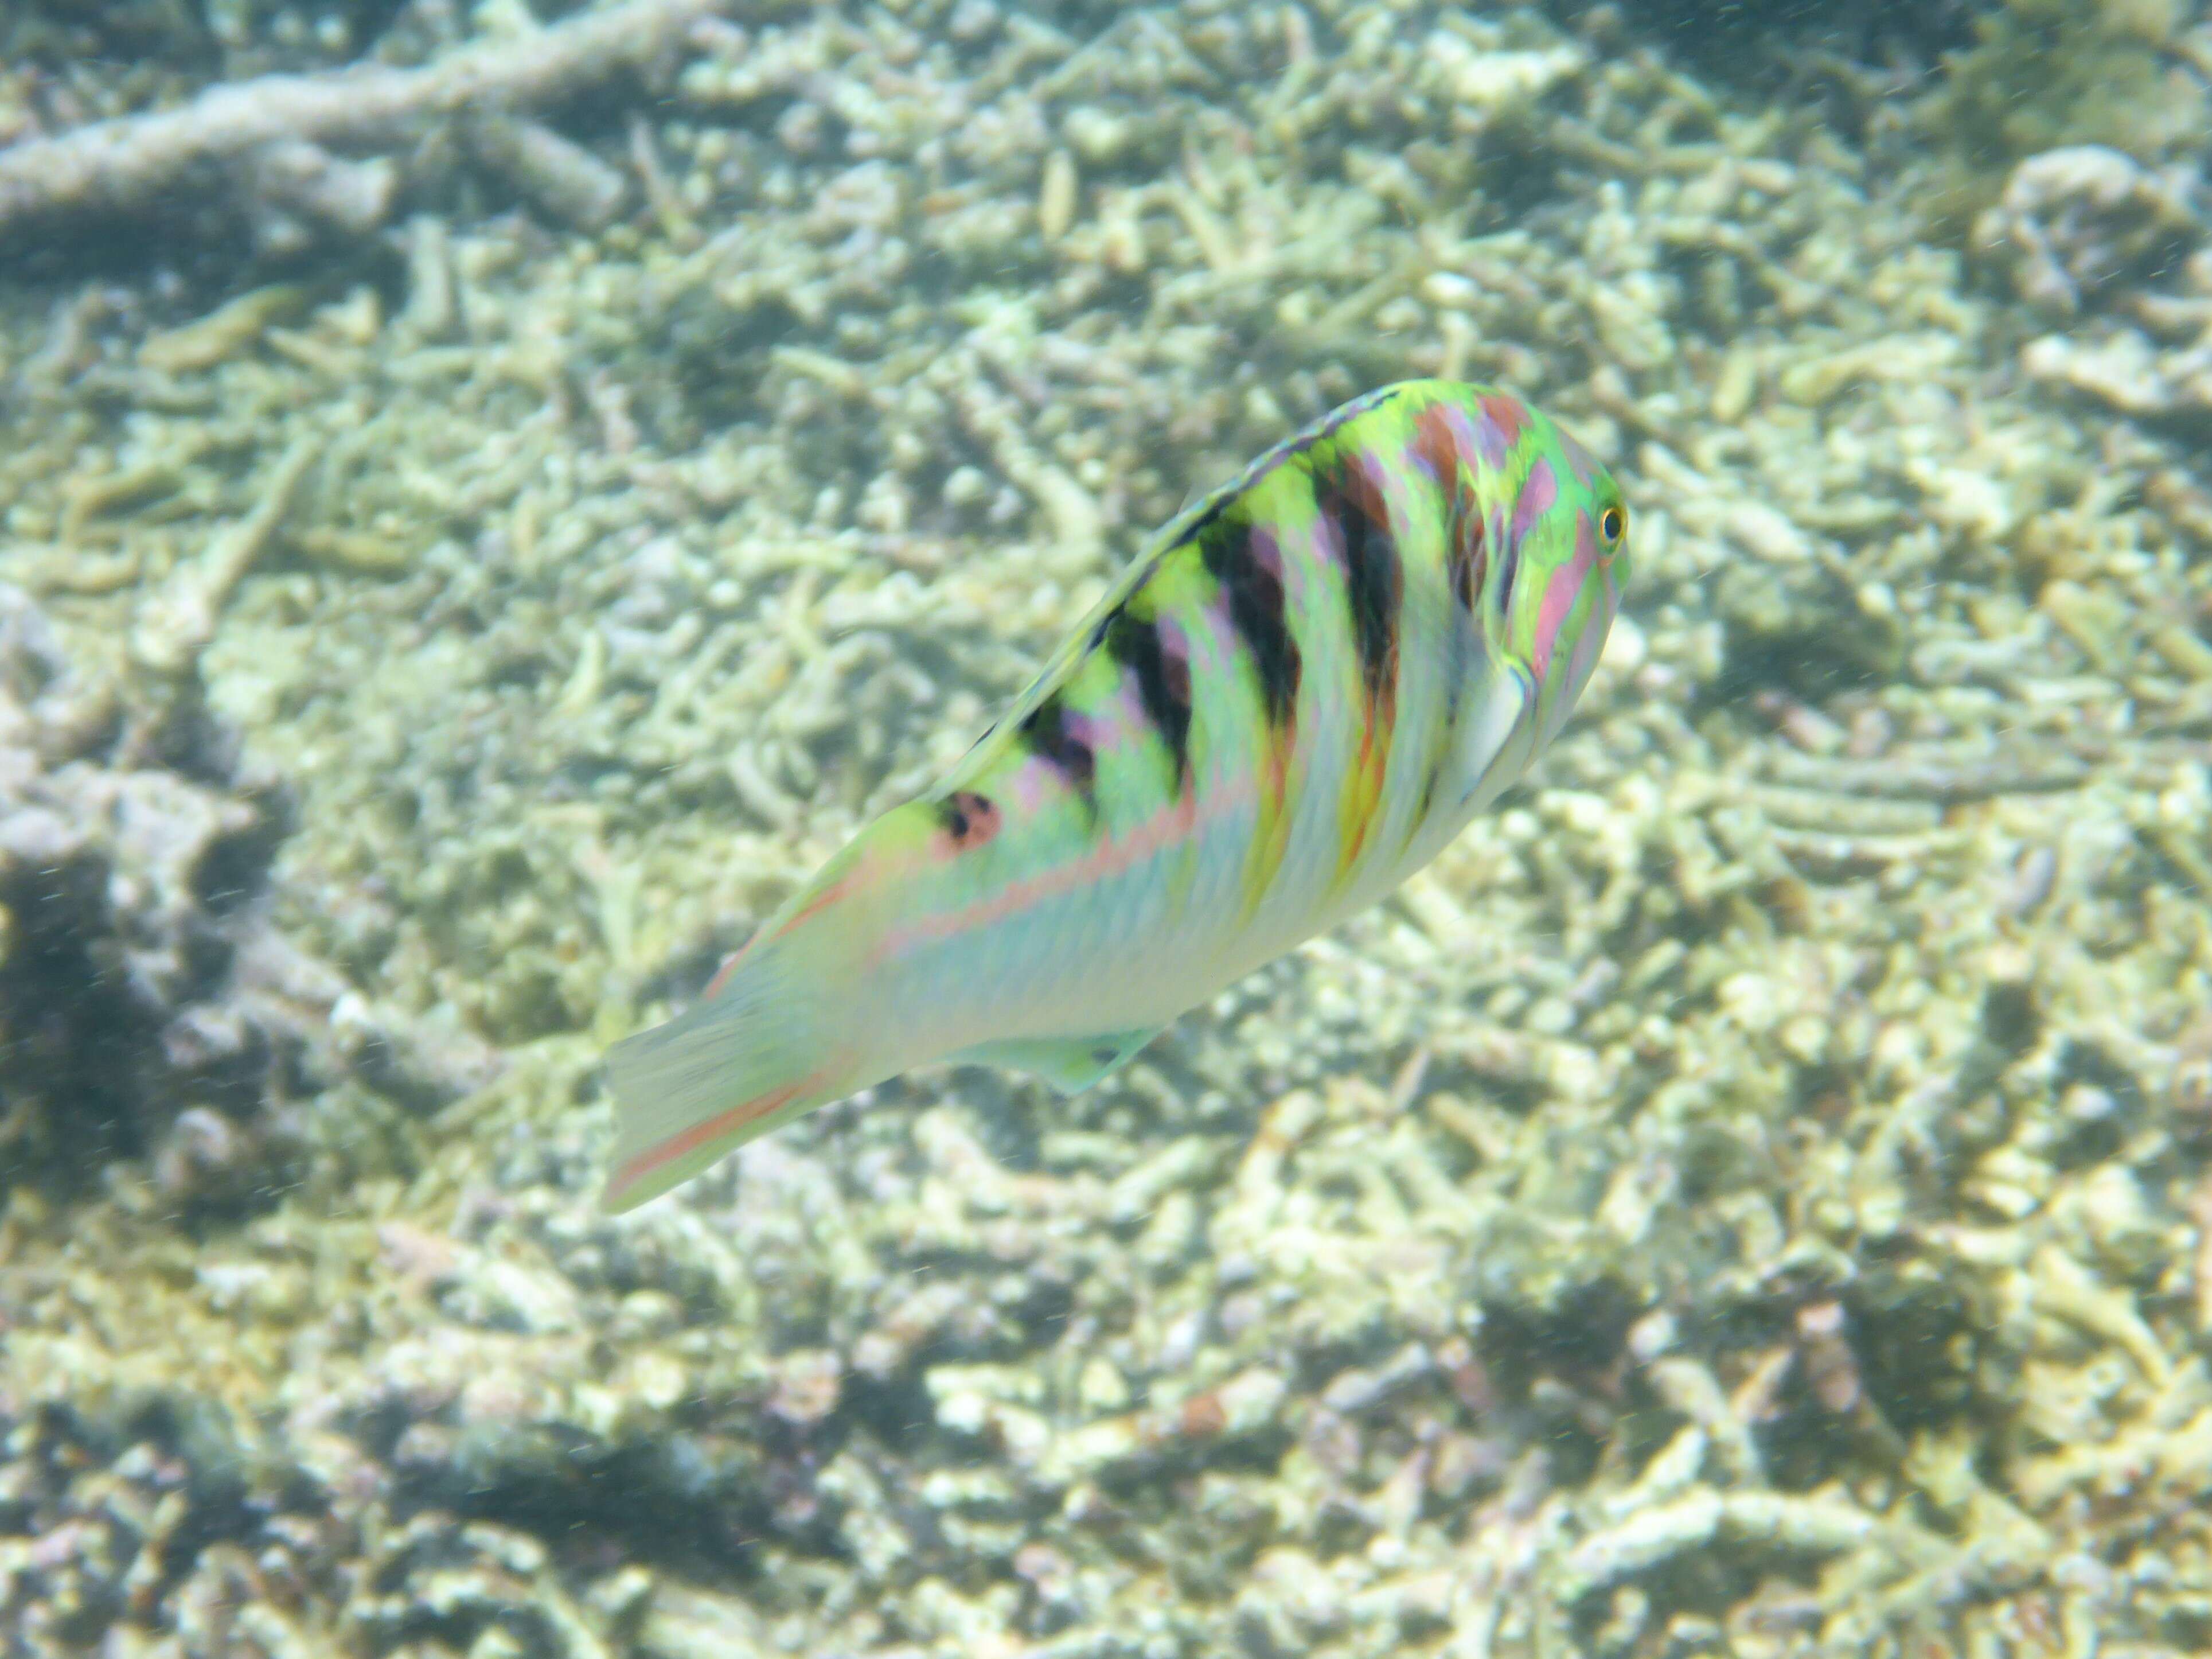 Image of Parrotfish